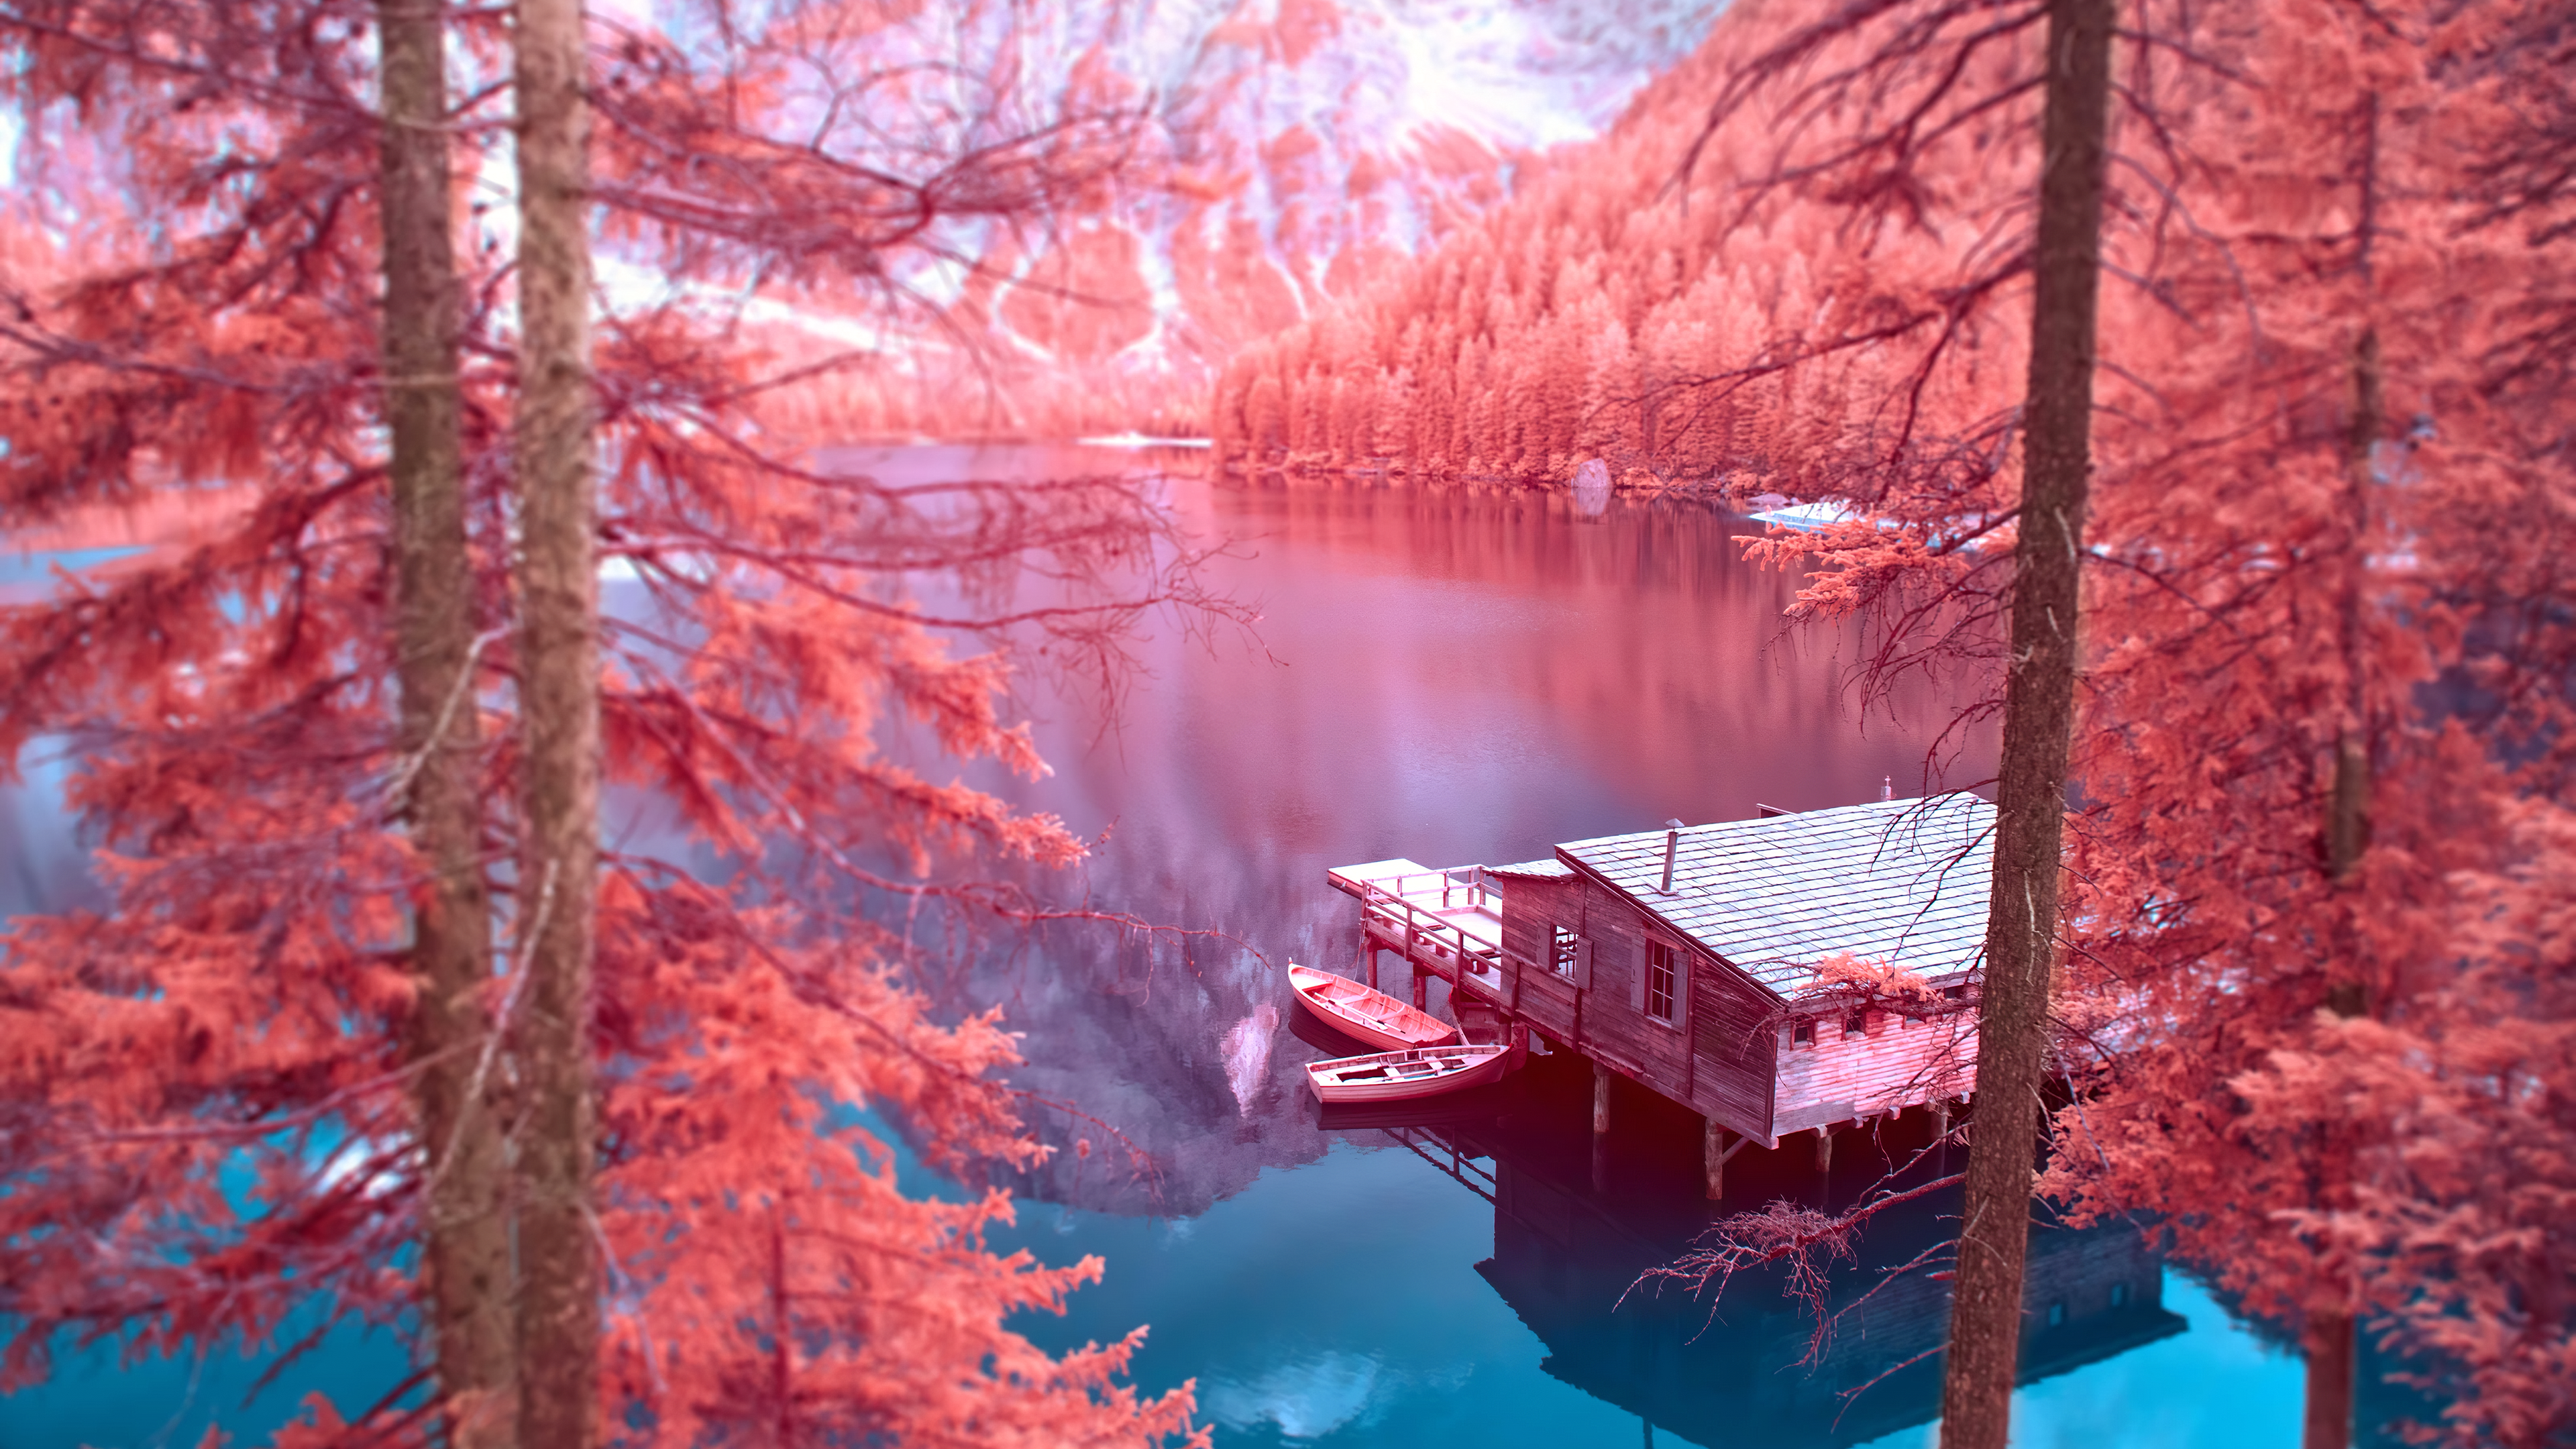 Infrared Photography by Paolo Pettigiani